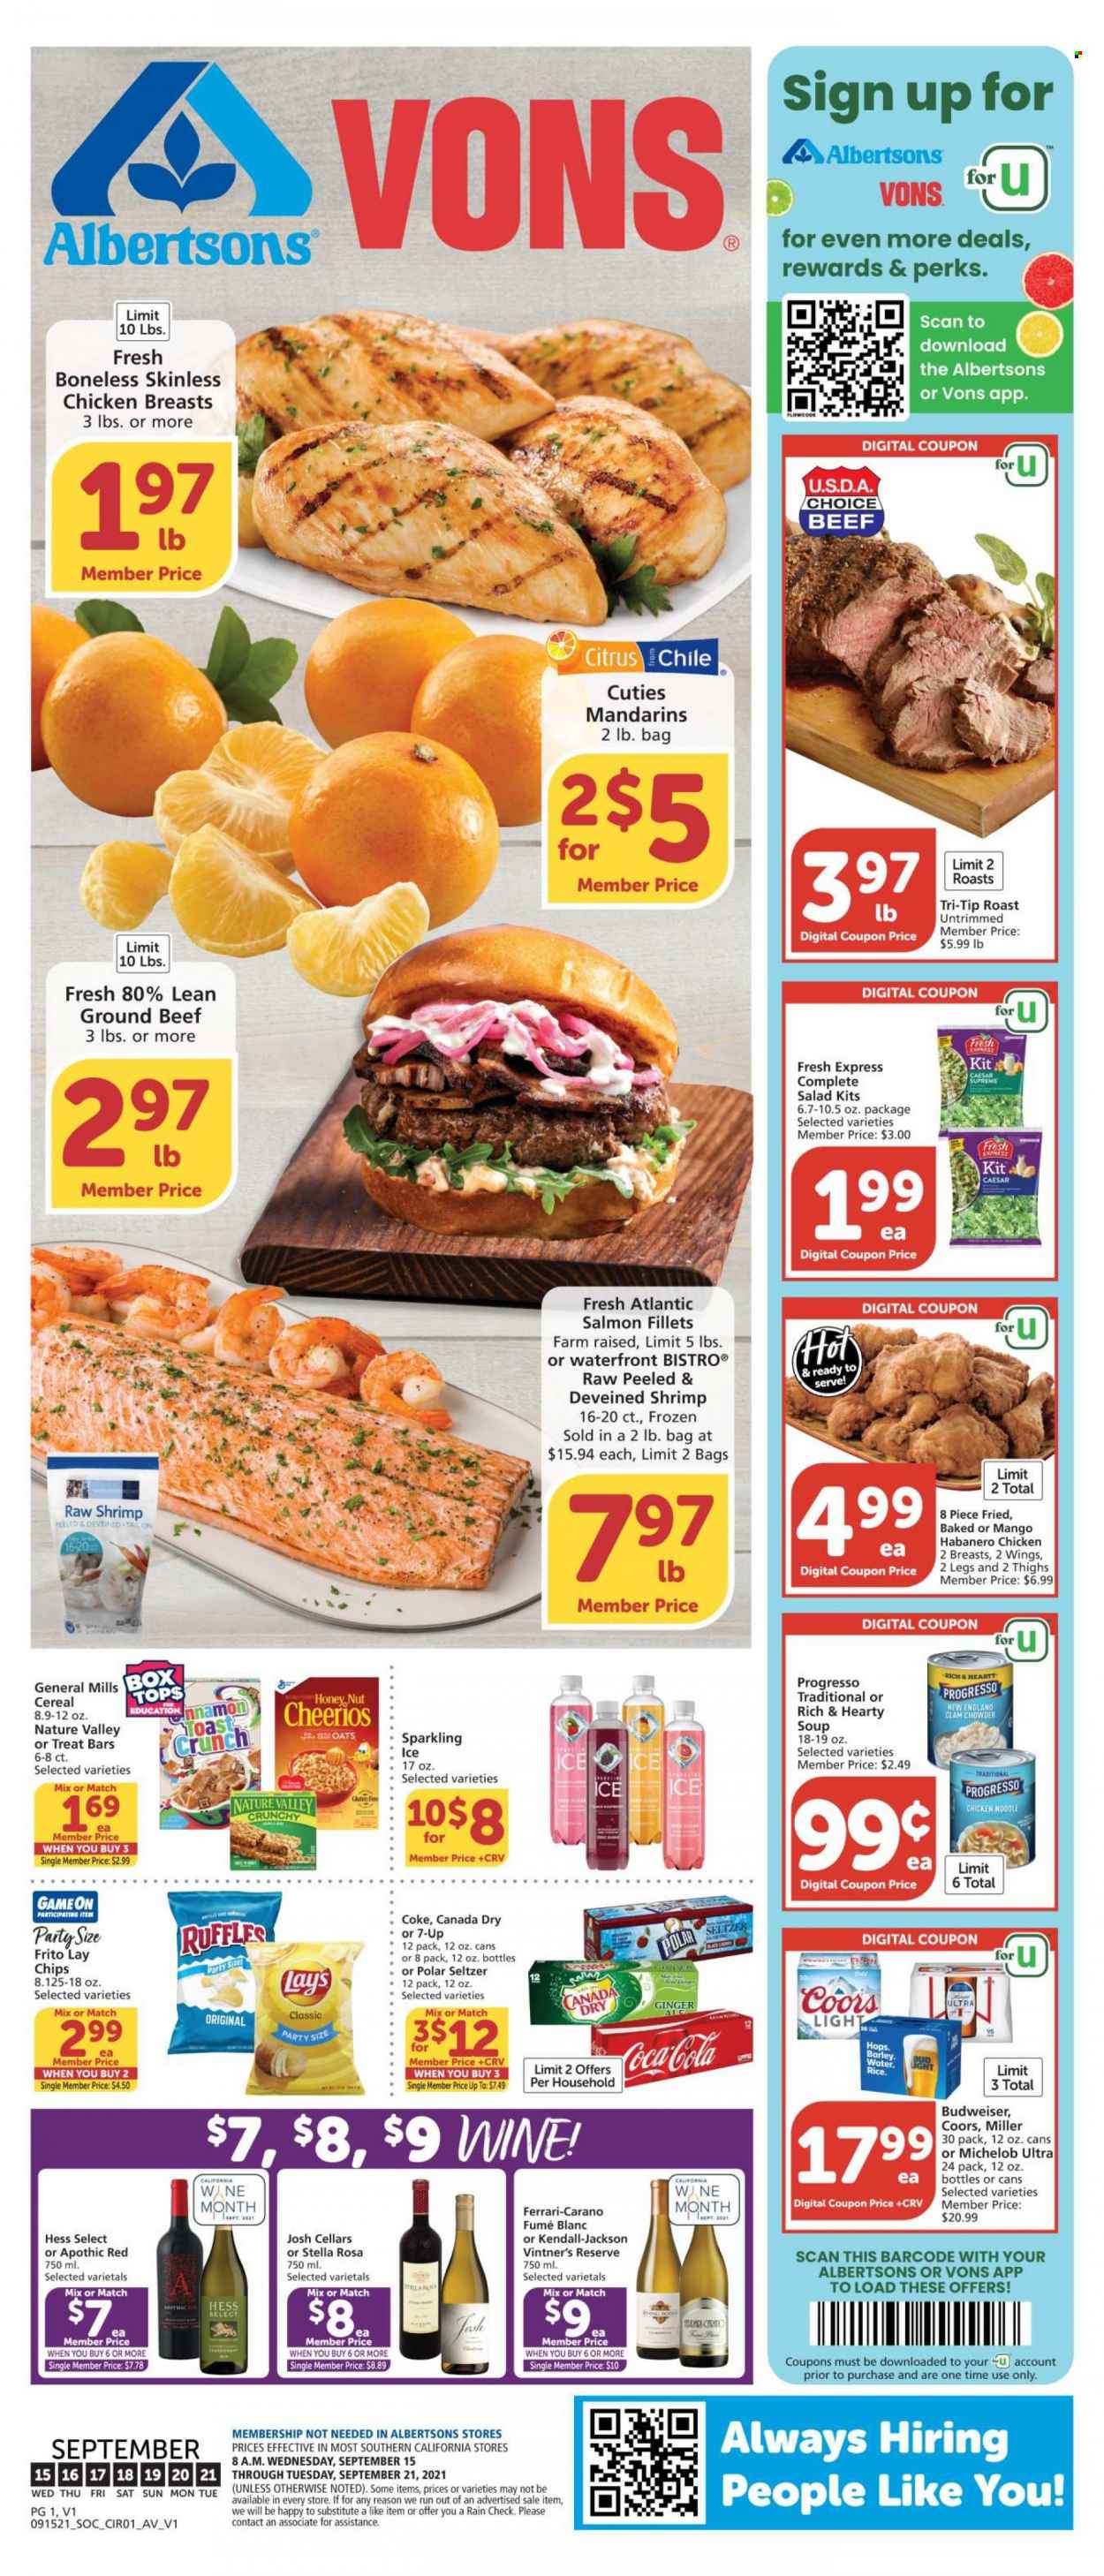 thumbnail - Vons Flyer - 09/15/2021 - 09/21/2021 - Sales products - ginger, salad, mandarines, chicken breasts, beef meat, ground beef, salmon, salmon fillet, shrimps, soup, noodles, Progresso, habanero chicken, Ruffles, oats, clam chowder, cereals, Cheerios, Nature Valley, Canada Dry, Coca-Cola, 7UP, seltzer water, wine, beer, Bud Light, Miller, Budweiser, Coors, Michelob. Page 1.